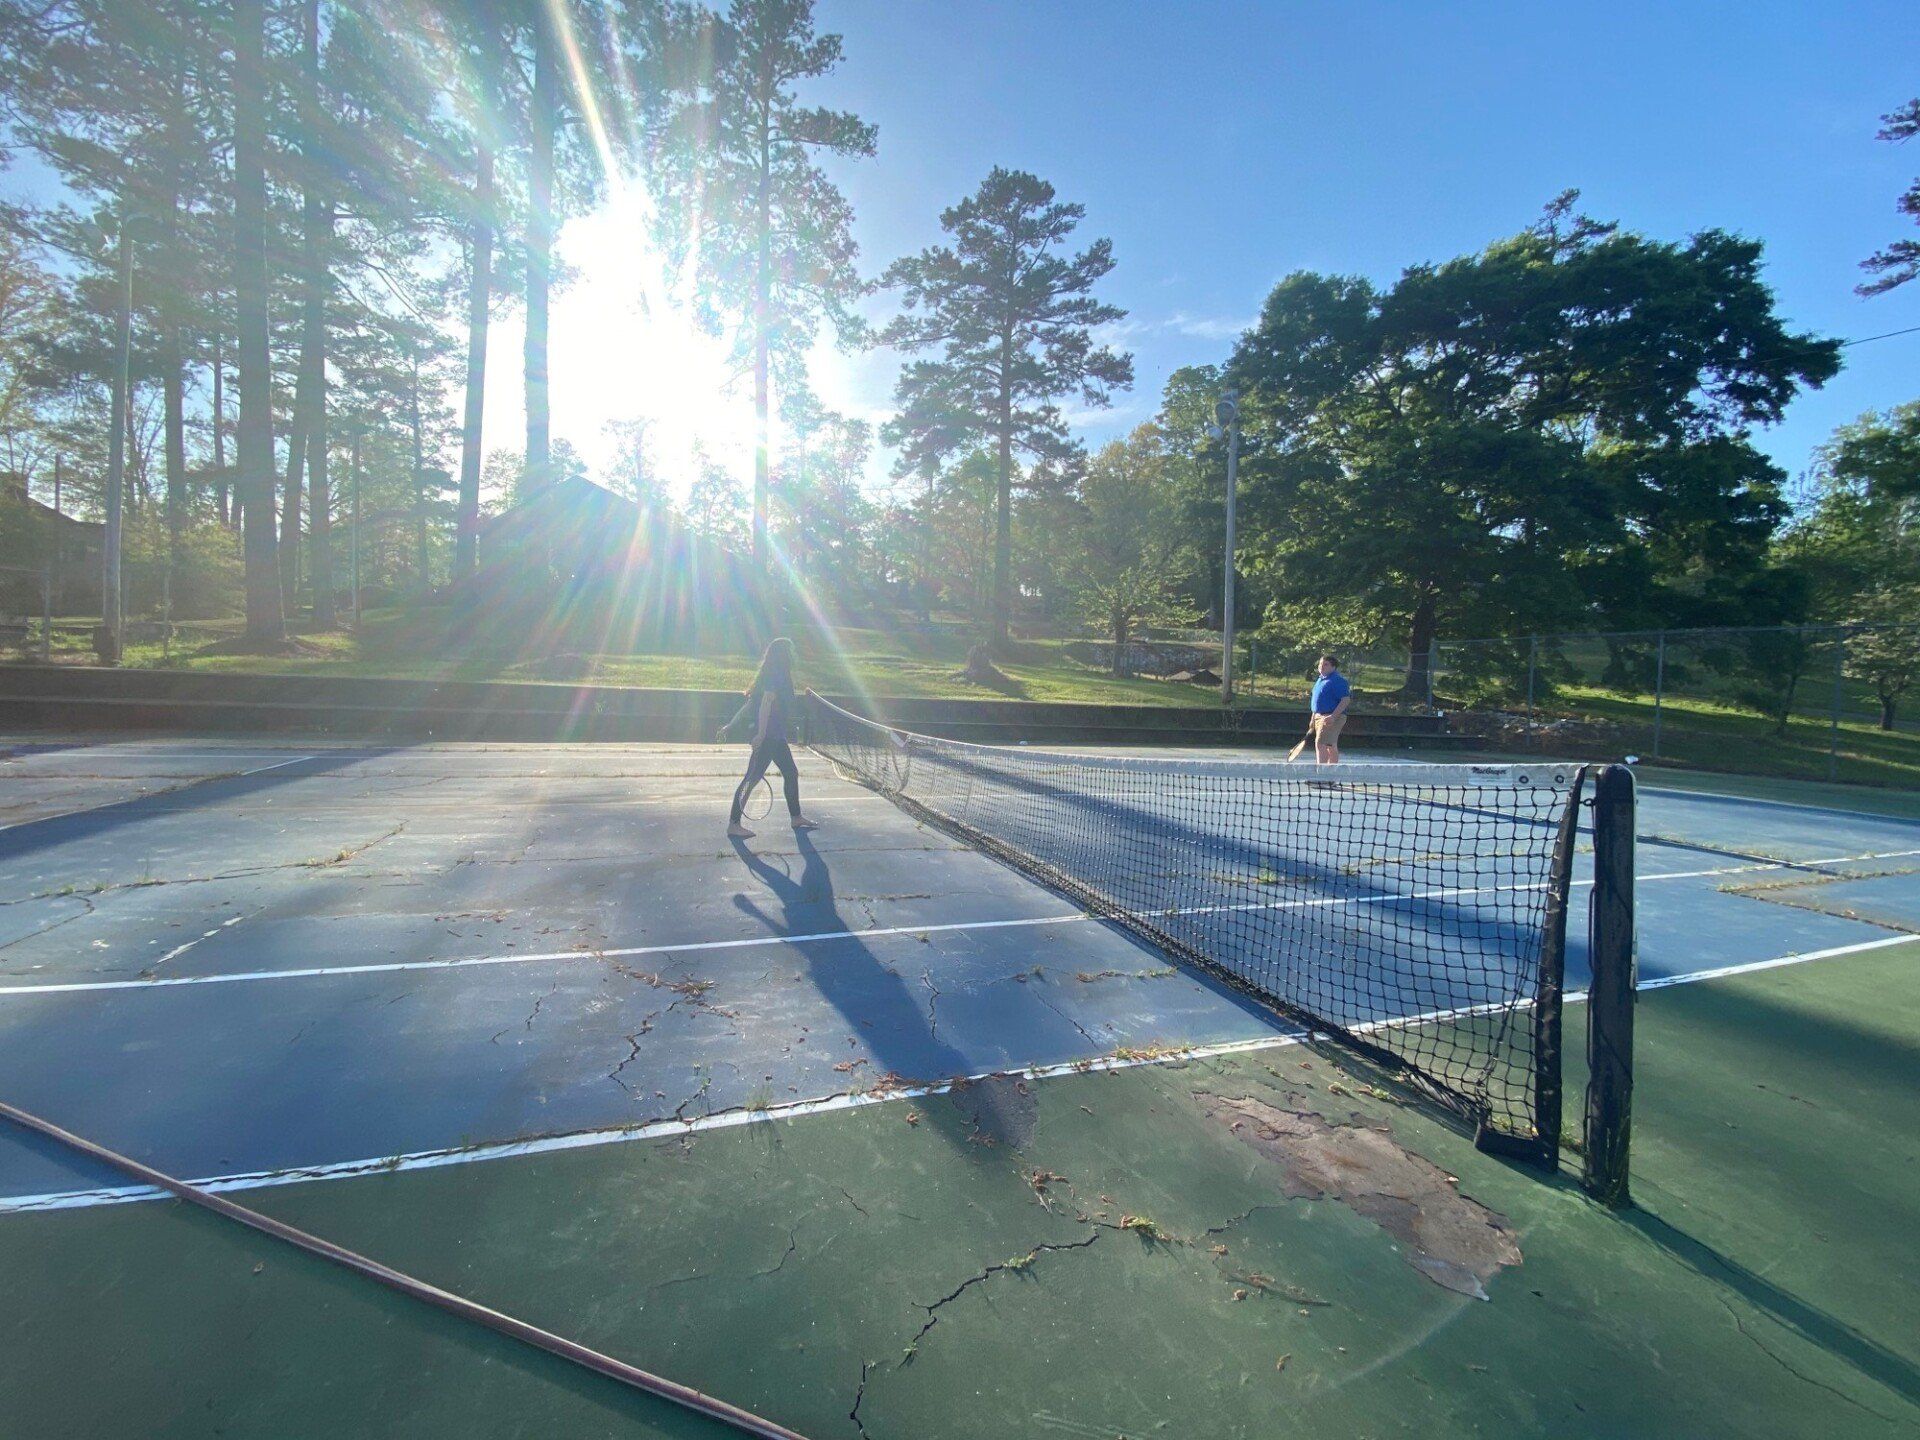 a person is playing tennis on a court with the sun shining through the trees